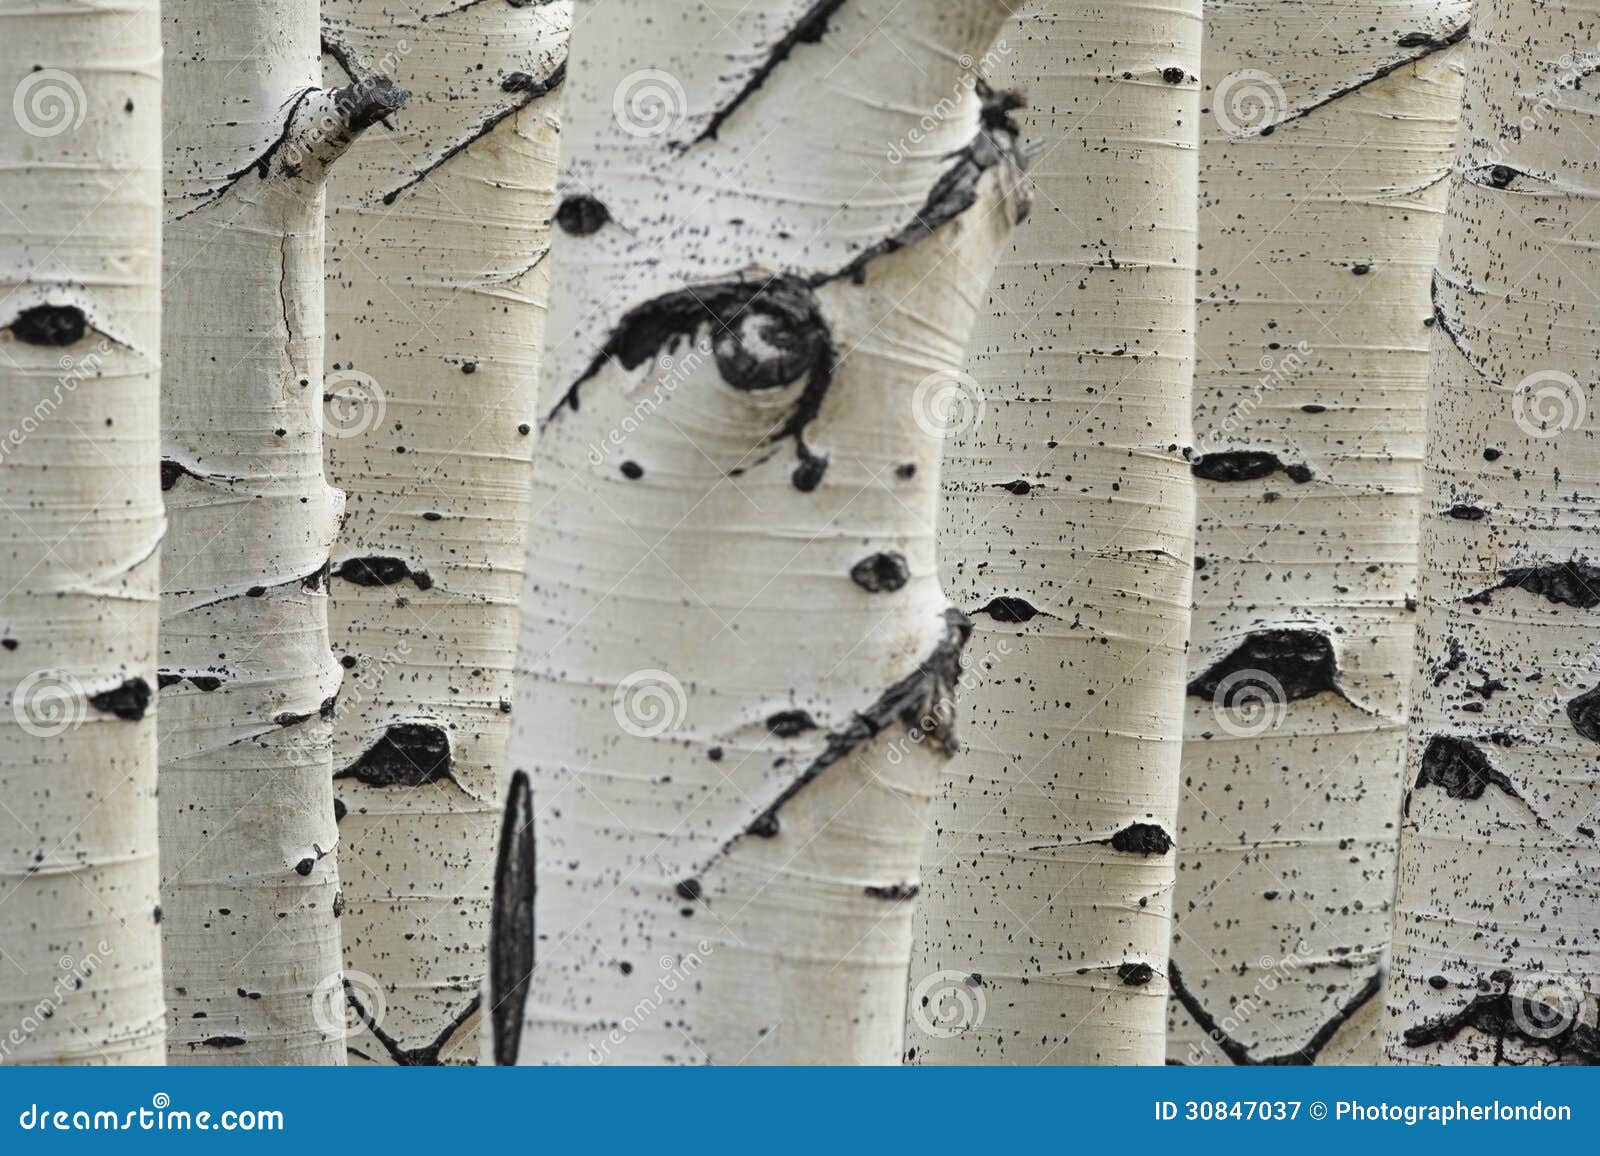 birch trees in a row close-up of trunks